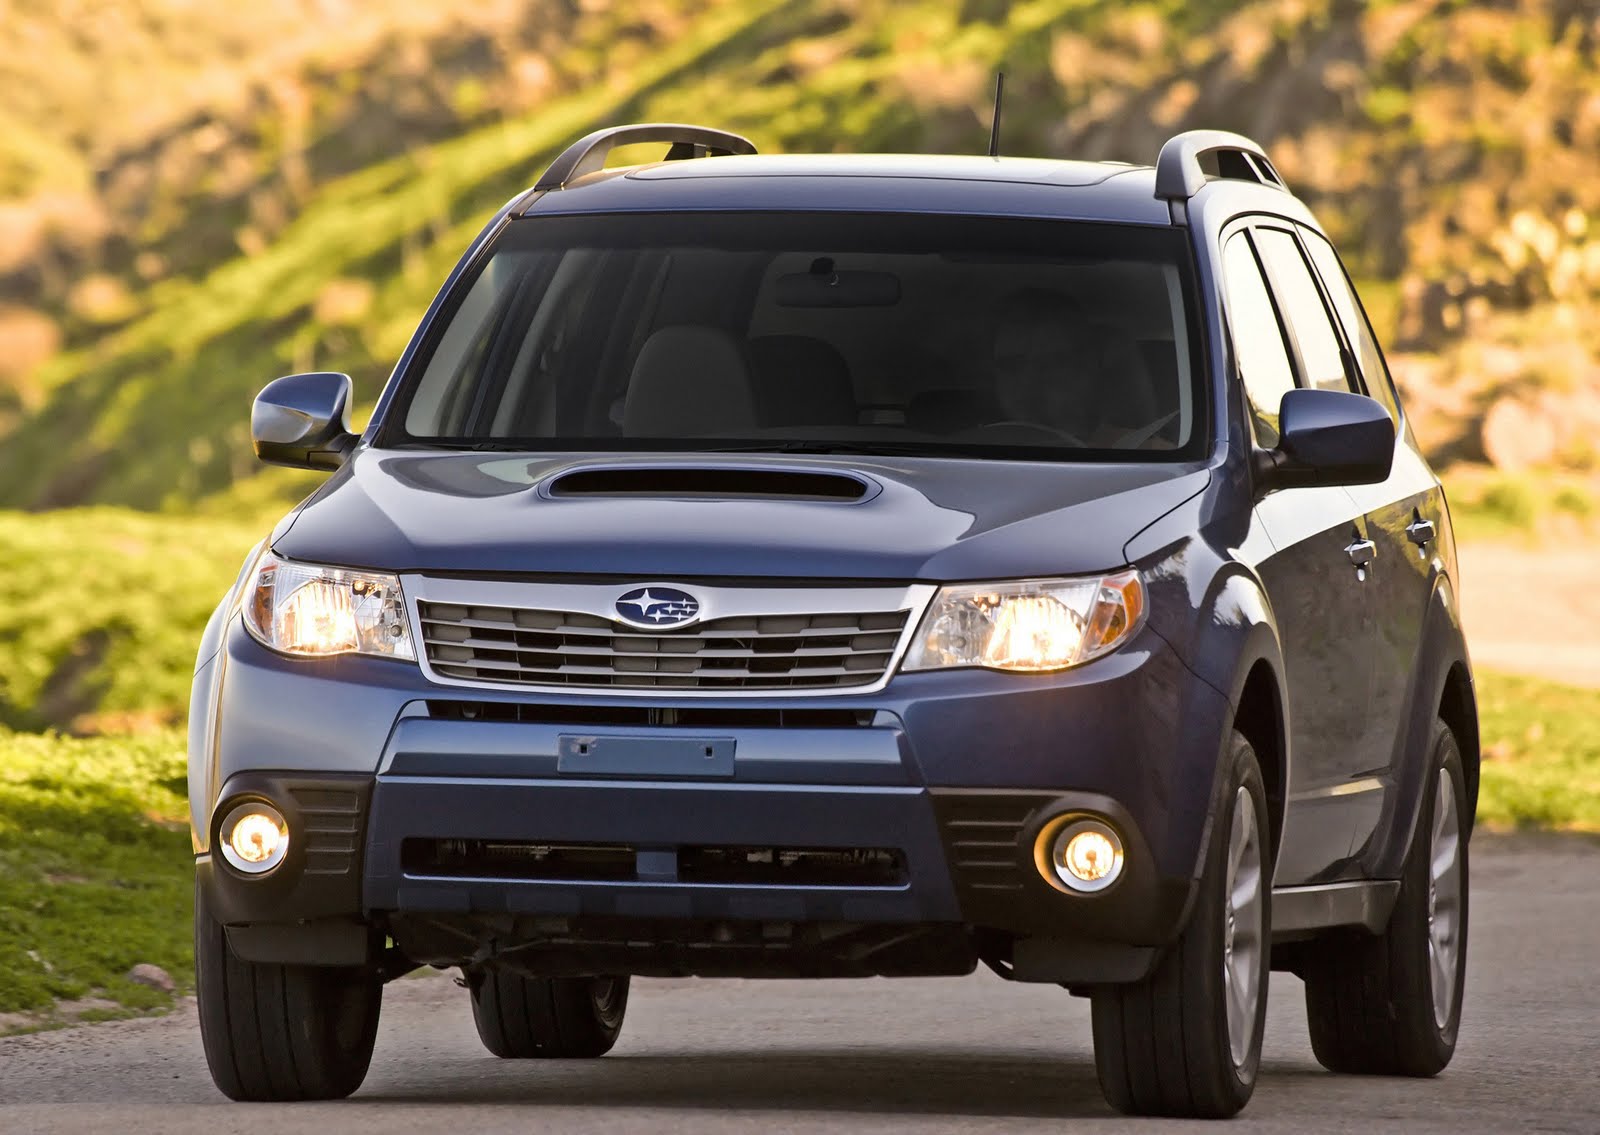 2011 Subaru Forester Review NEW CARUSED CAR REVIEWS PICTURE